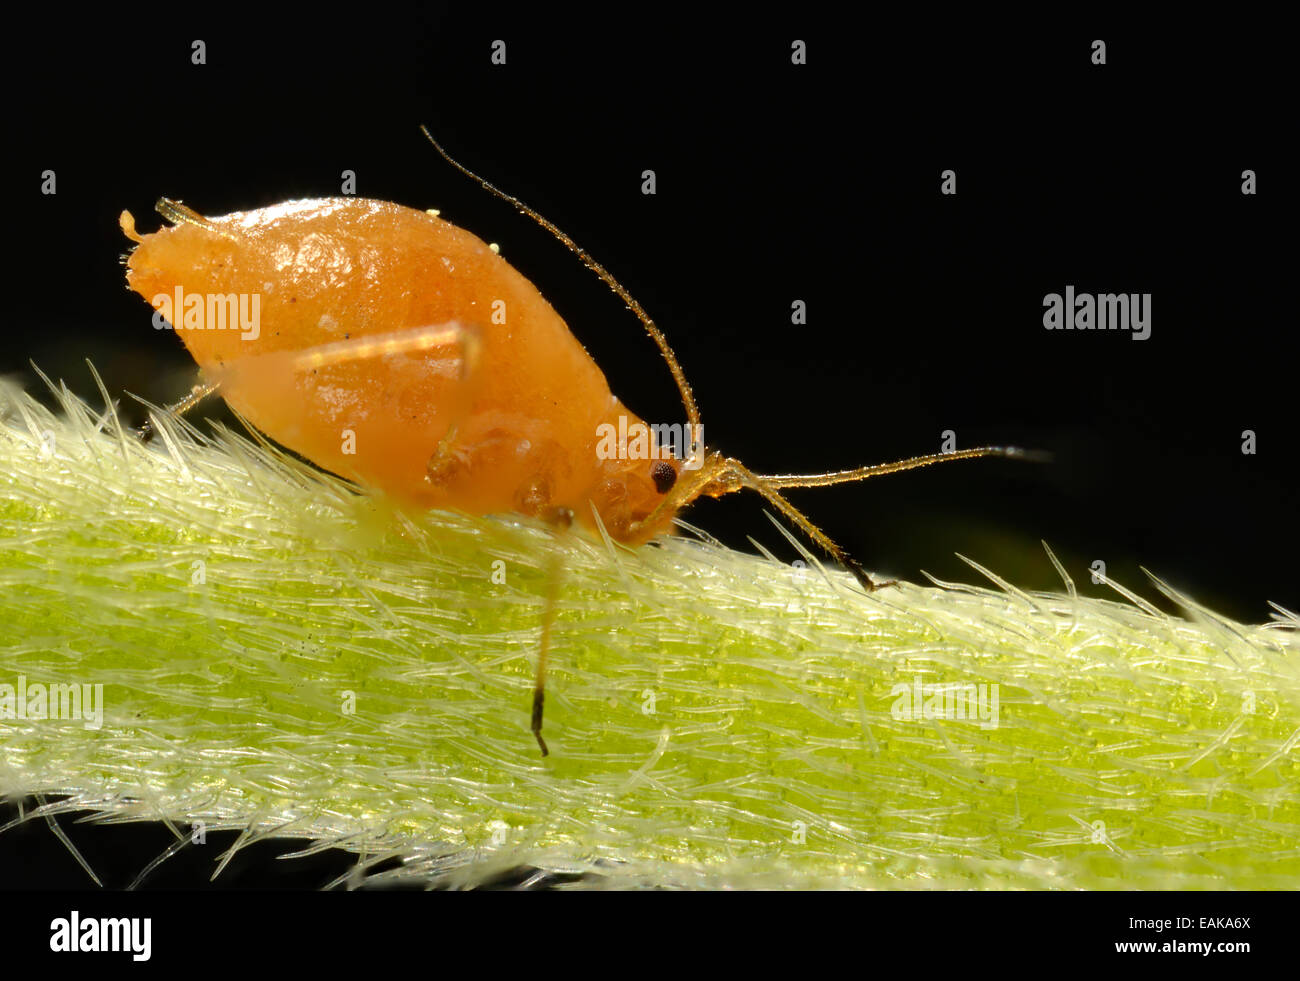 Young Aphid (Aphidoidea) on the flower stem of a Daisy (Bellis perennis), pest, macro shot, Baden-Württemberg, Germany Stock Photo